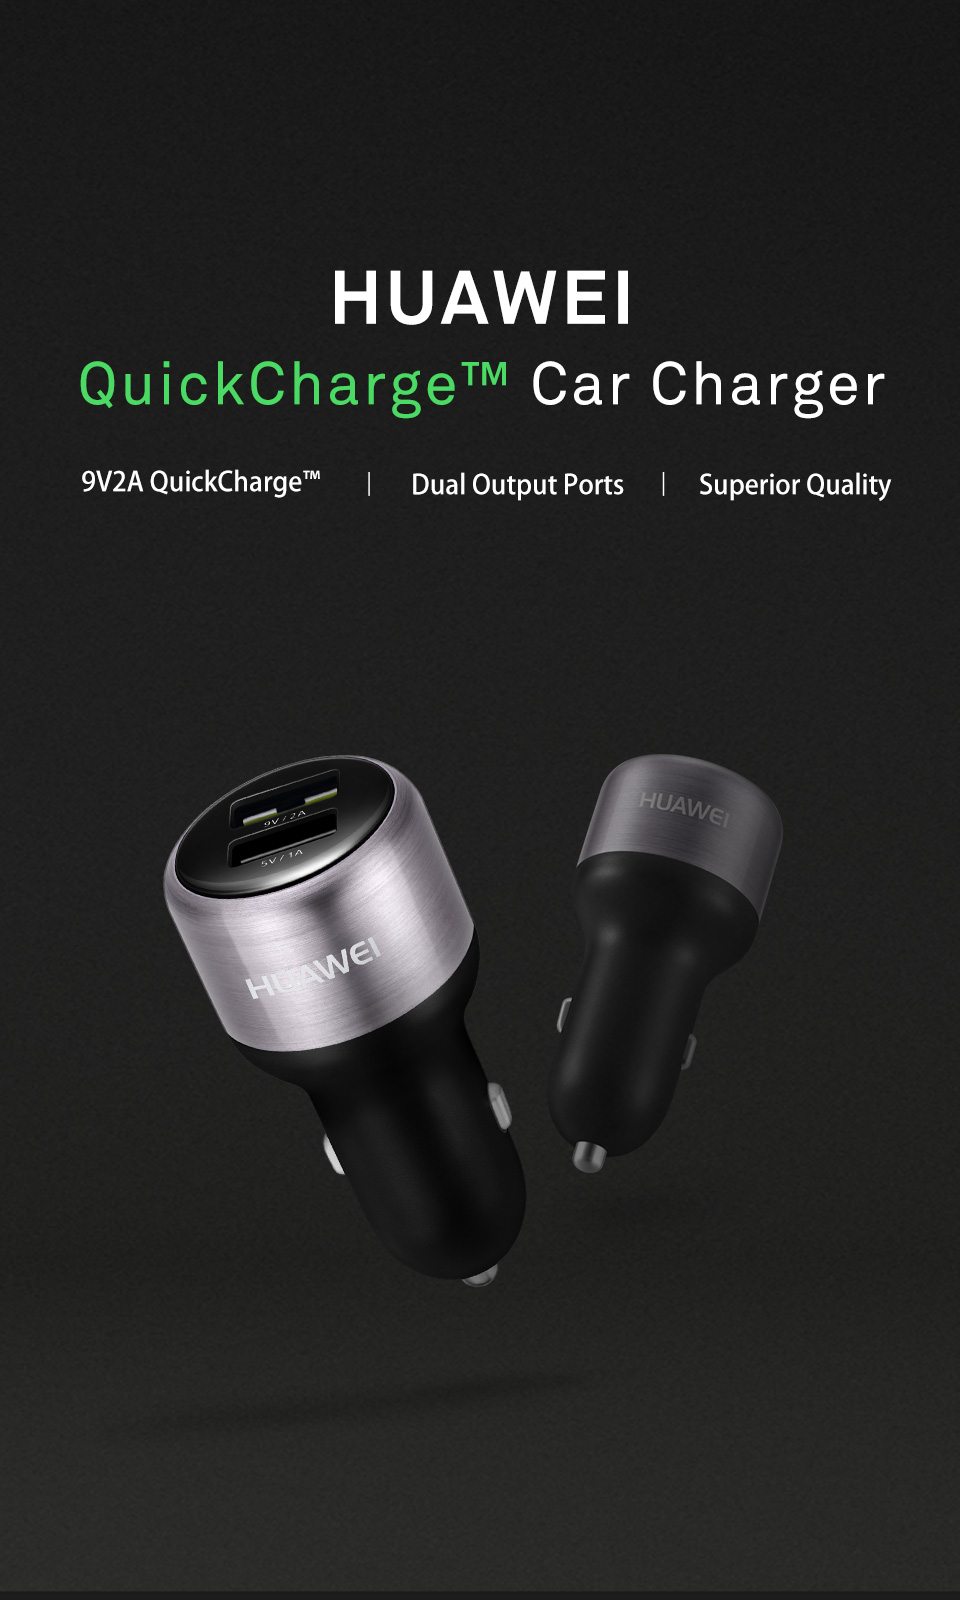  HUAWEI QuickCharge™ Car Charger